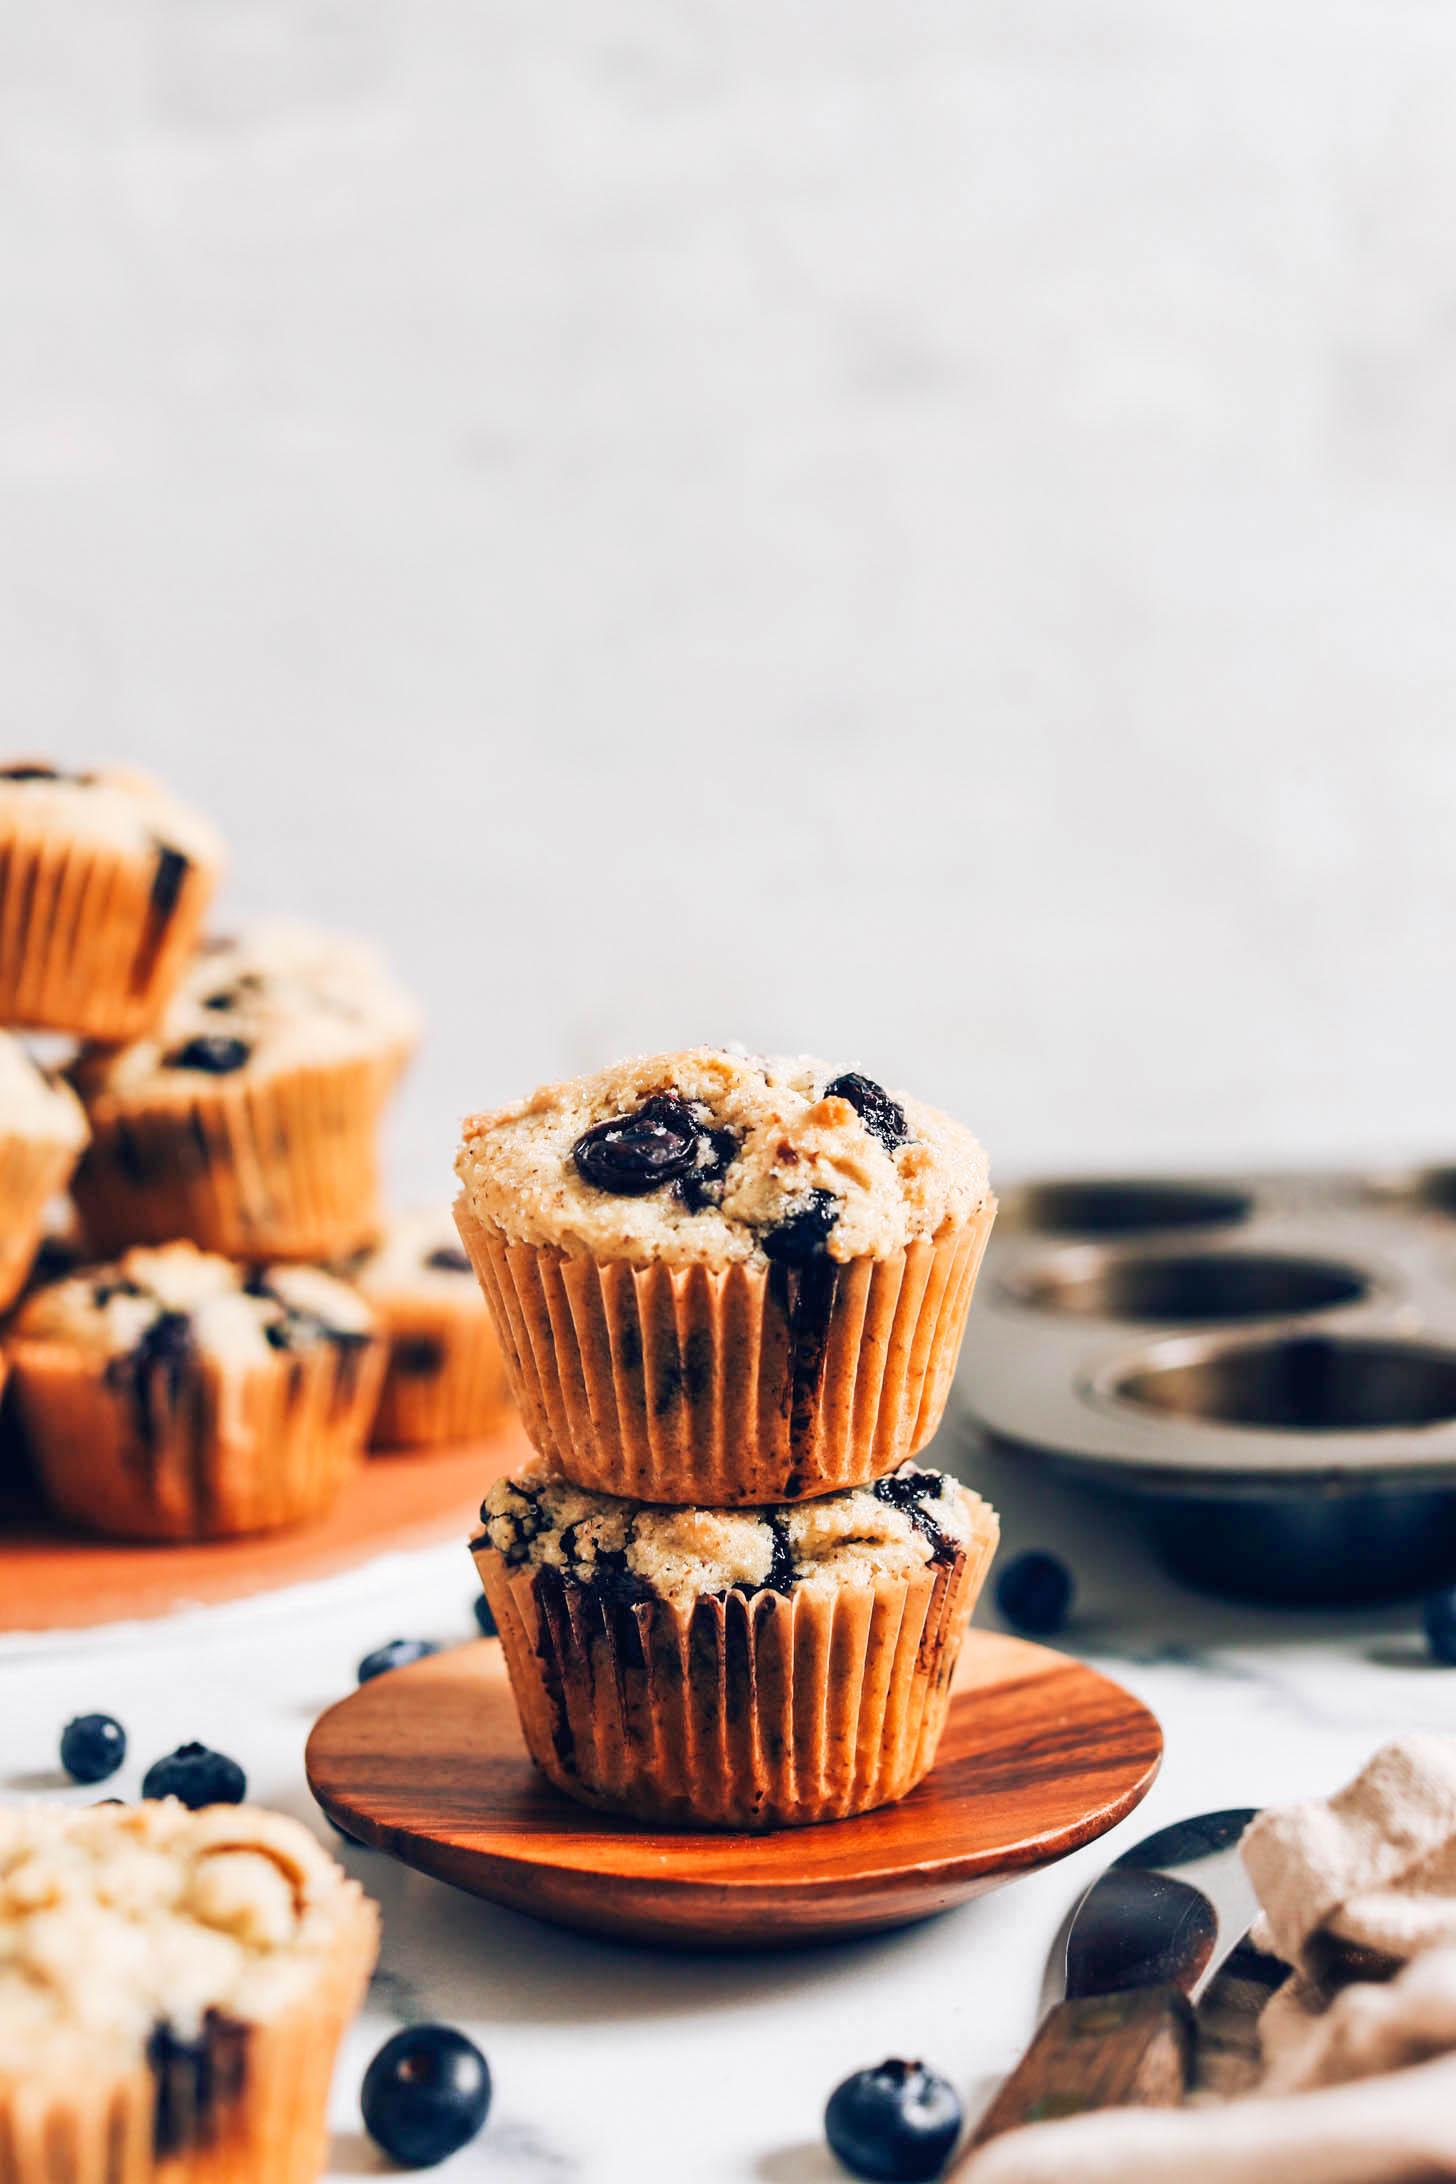 Two vegan gluten-free blueberry muffins on a plate with more muffins in the background and foreground